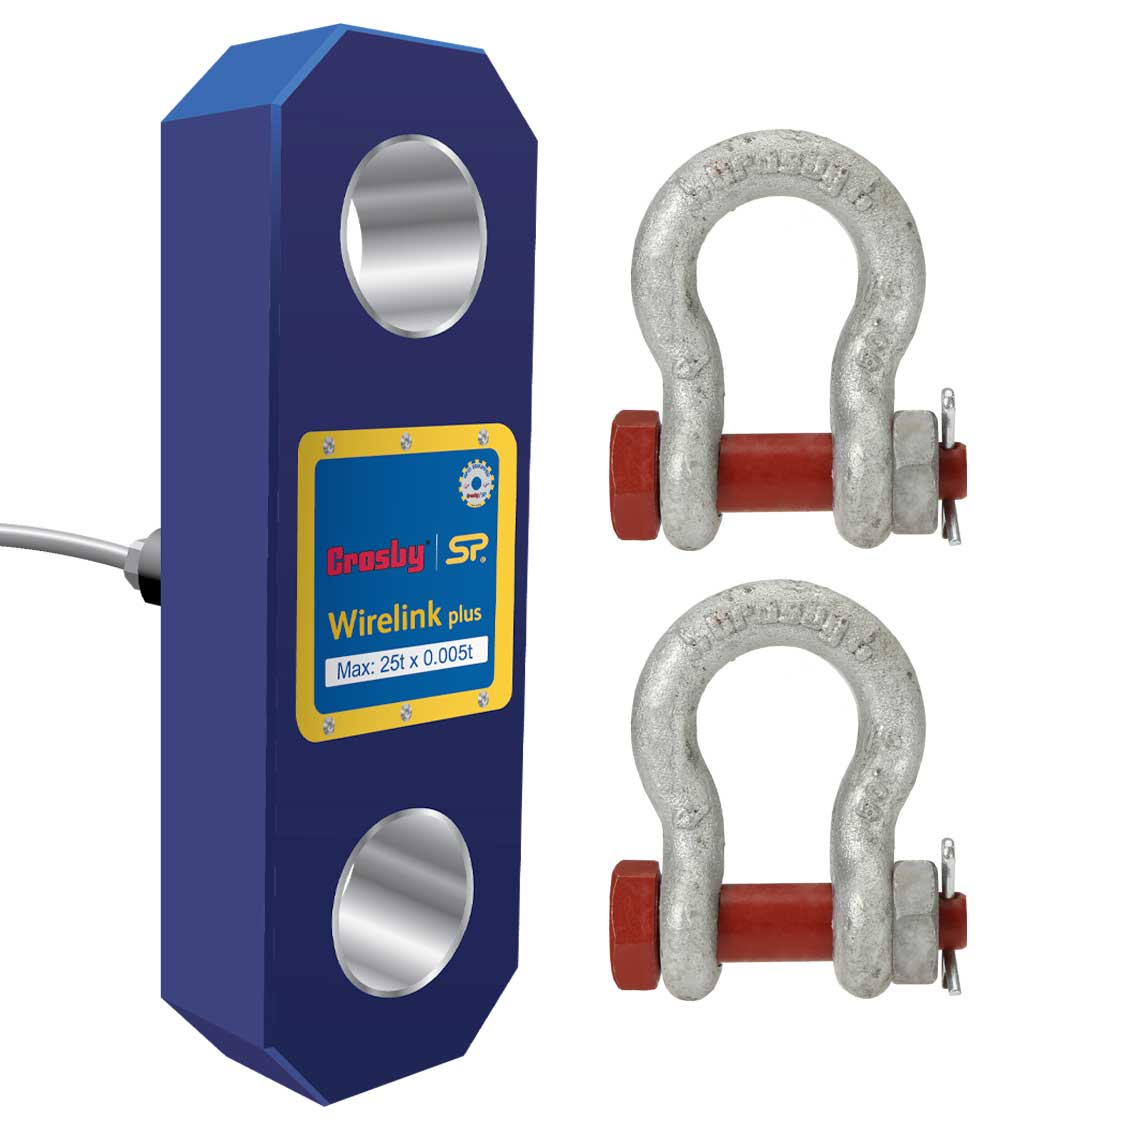 Straightpoint Wirelink Plus with two Crosby Shackles Kit image 1